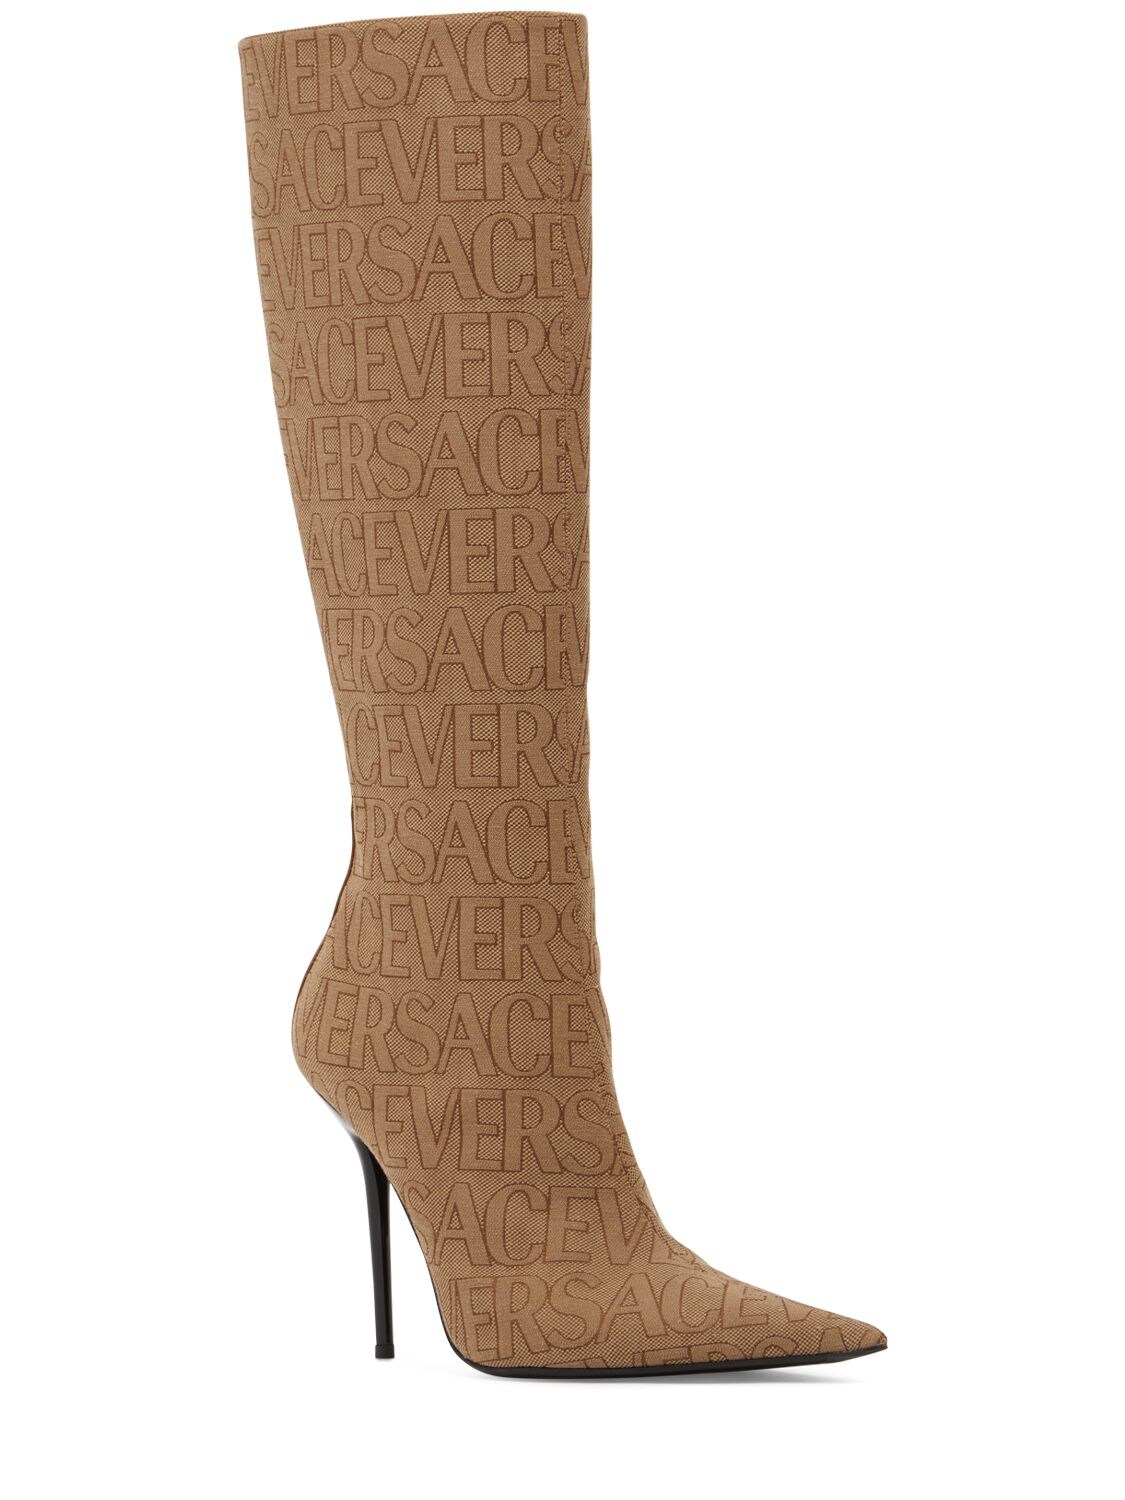 Shop Versace 110mm Canvas & Leather Boots In Beige